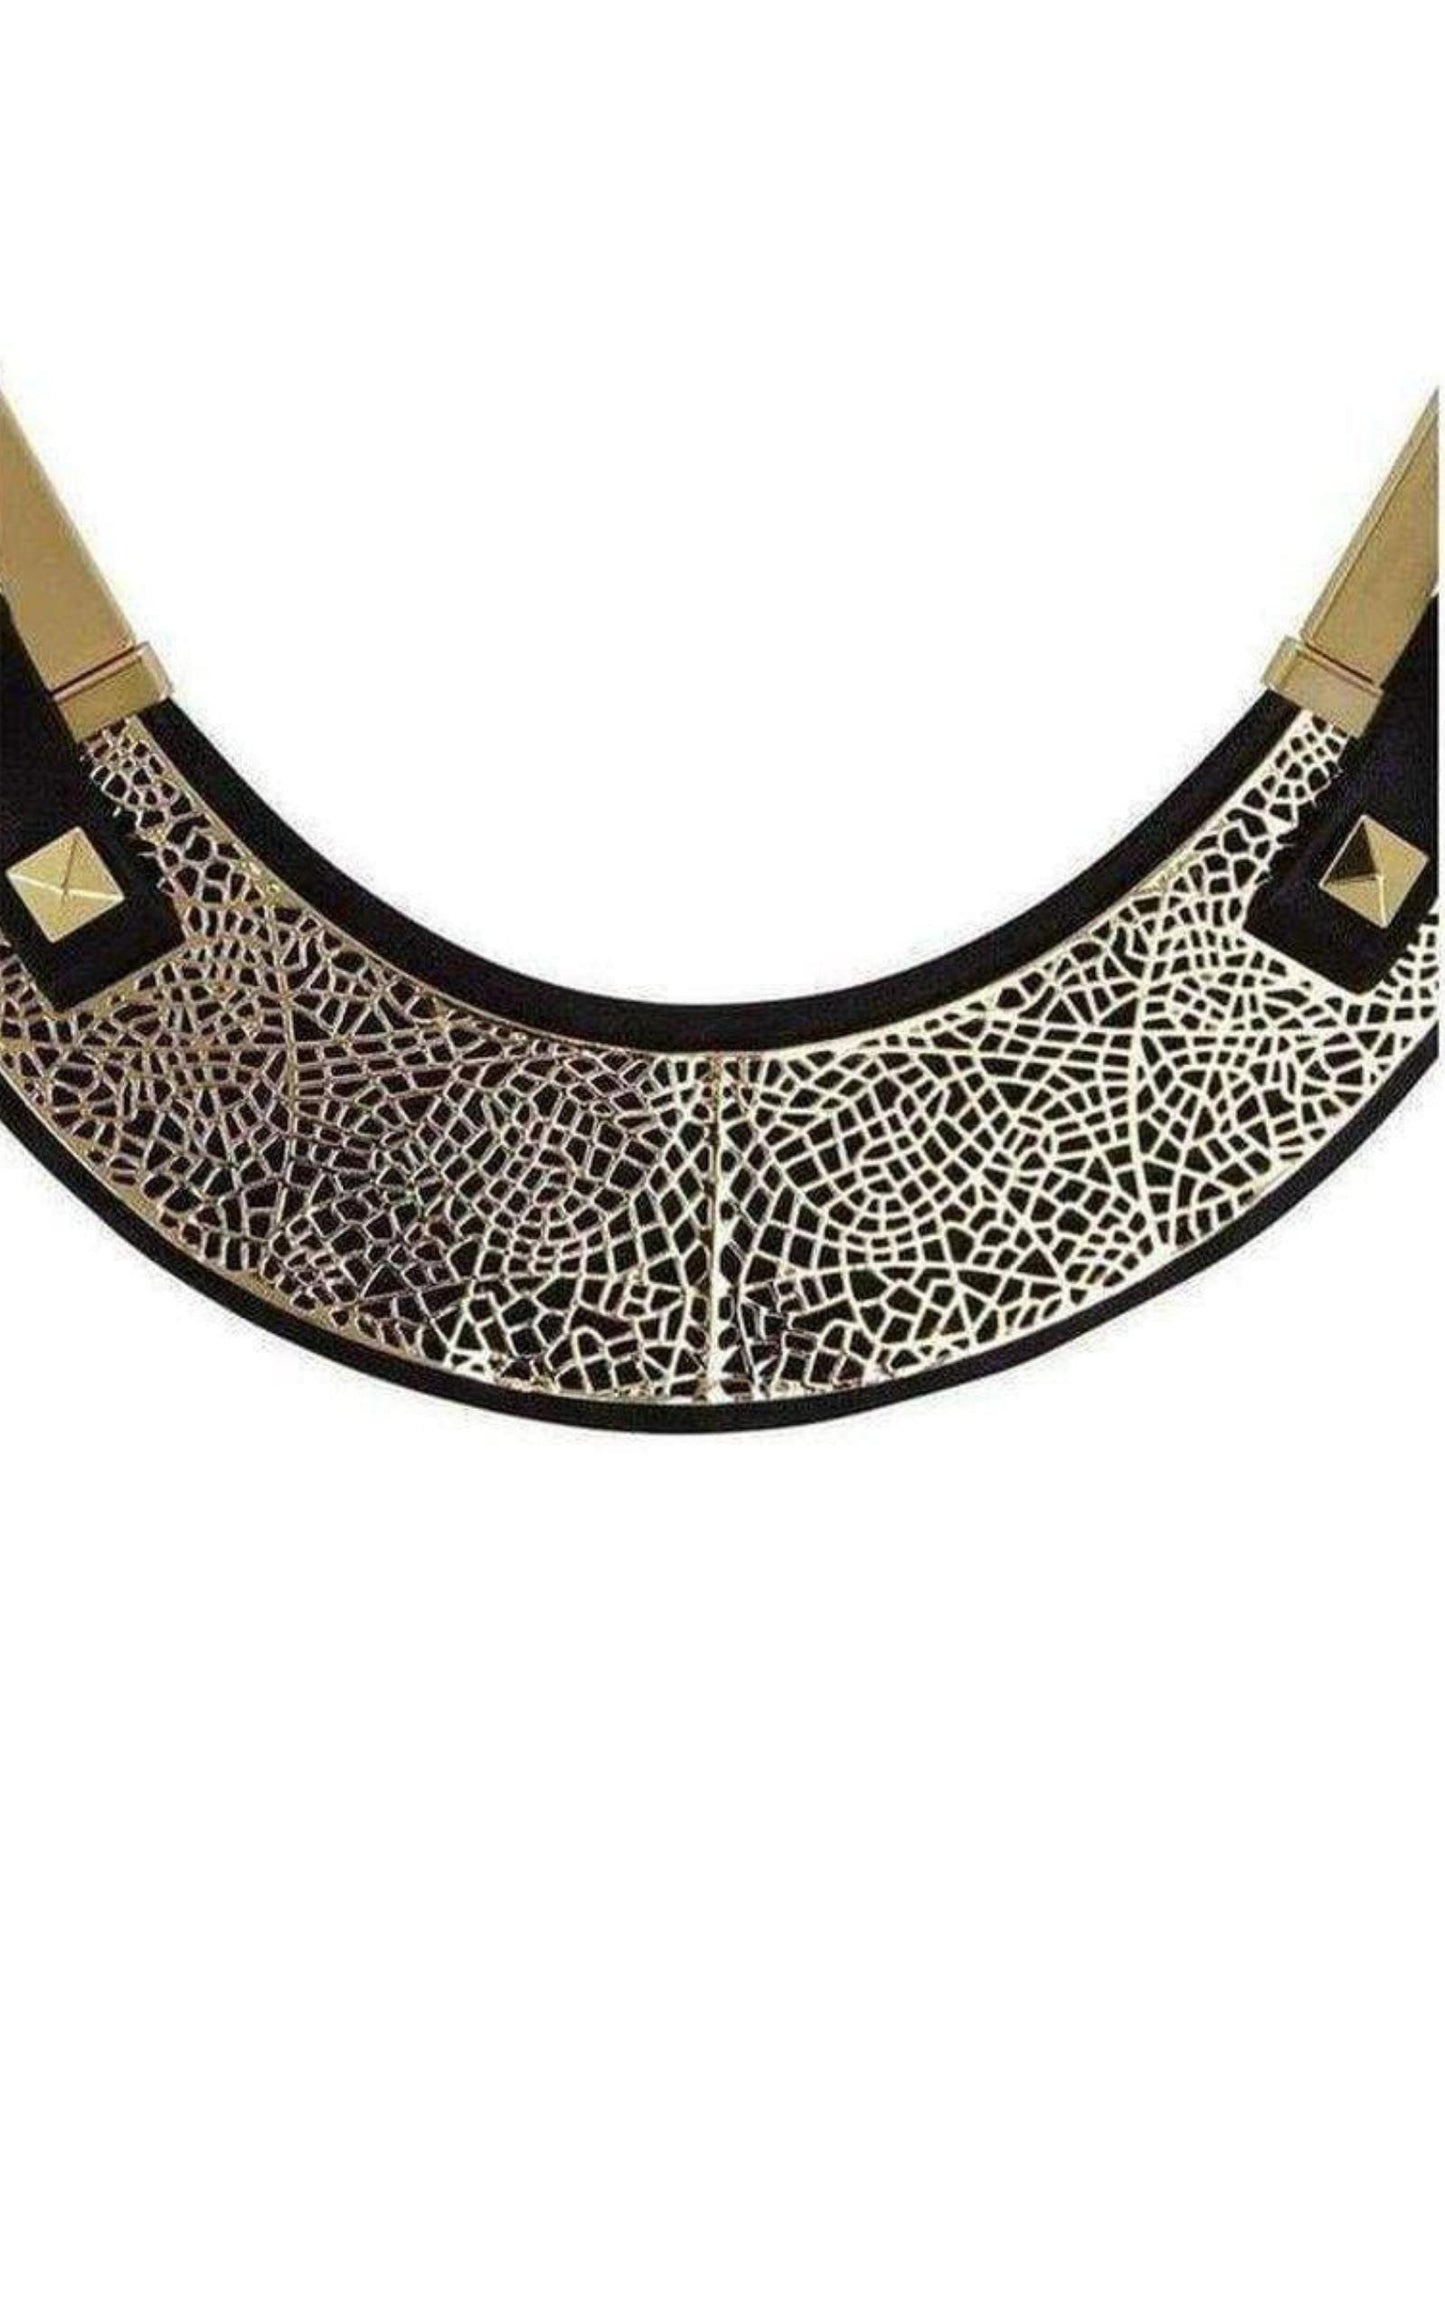 Faux-Leather Filigree-Plate Necklace